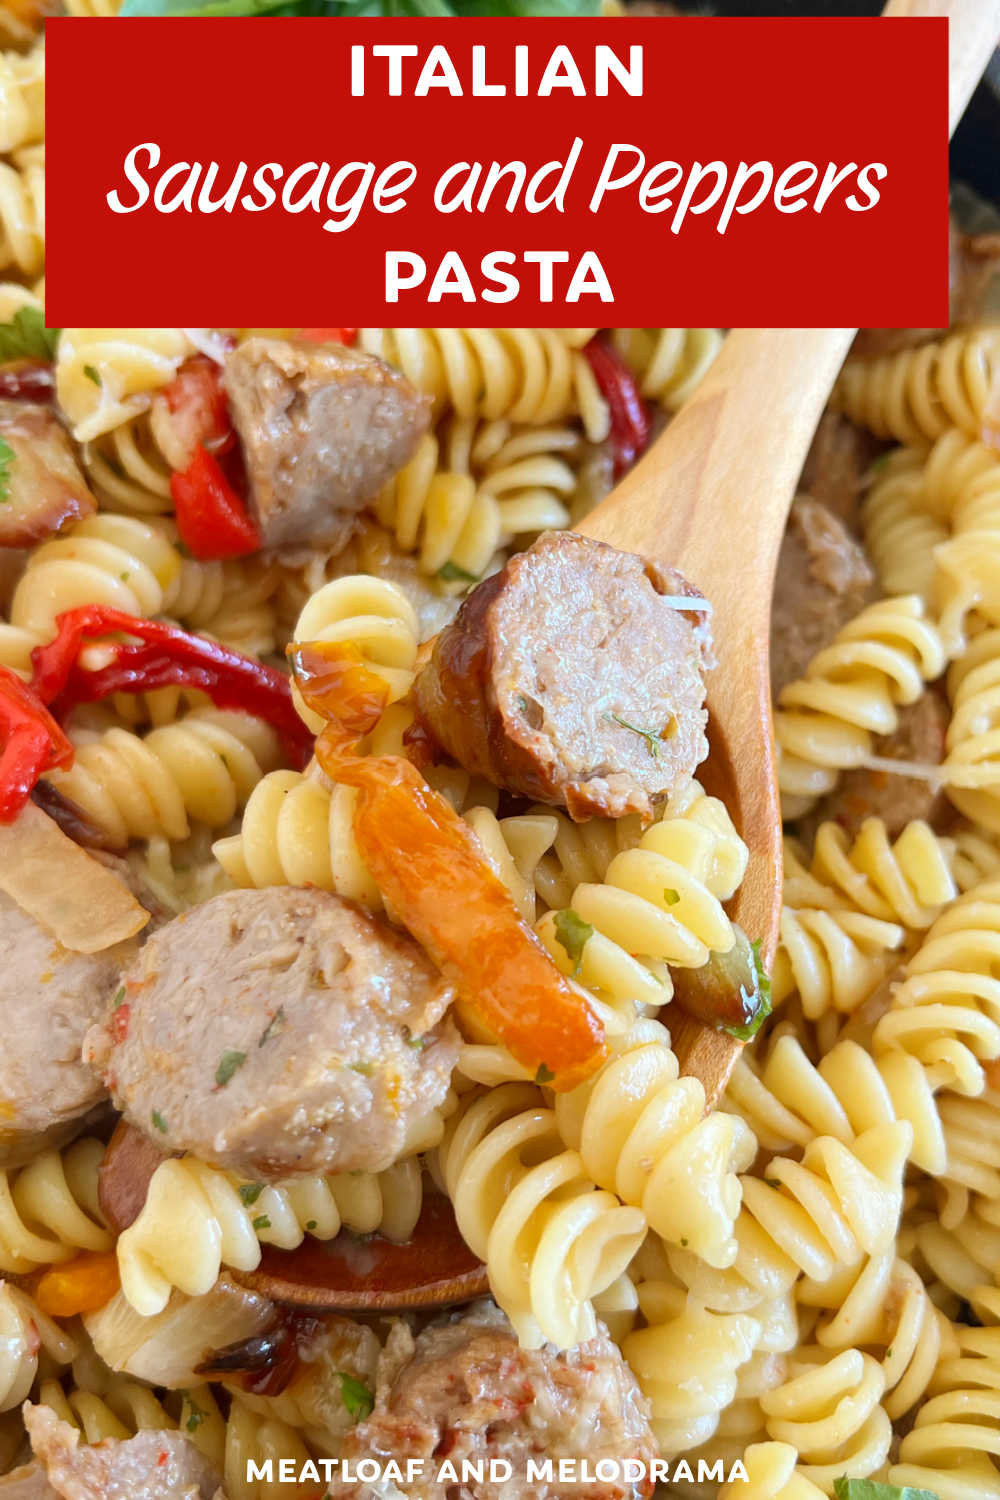 This Sausage and Peppers Pasta Recipe combines leftover Italian sausage, bell peppers and onions with pasta for a quick and easy meal perfect for busy weeknights. A delicious dinner the whole family will love! via @meamel